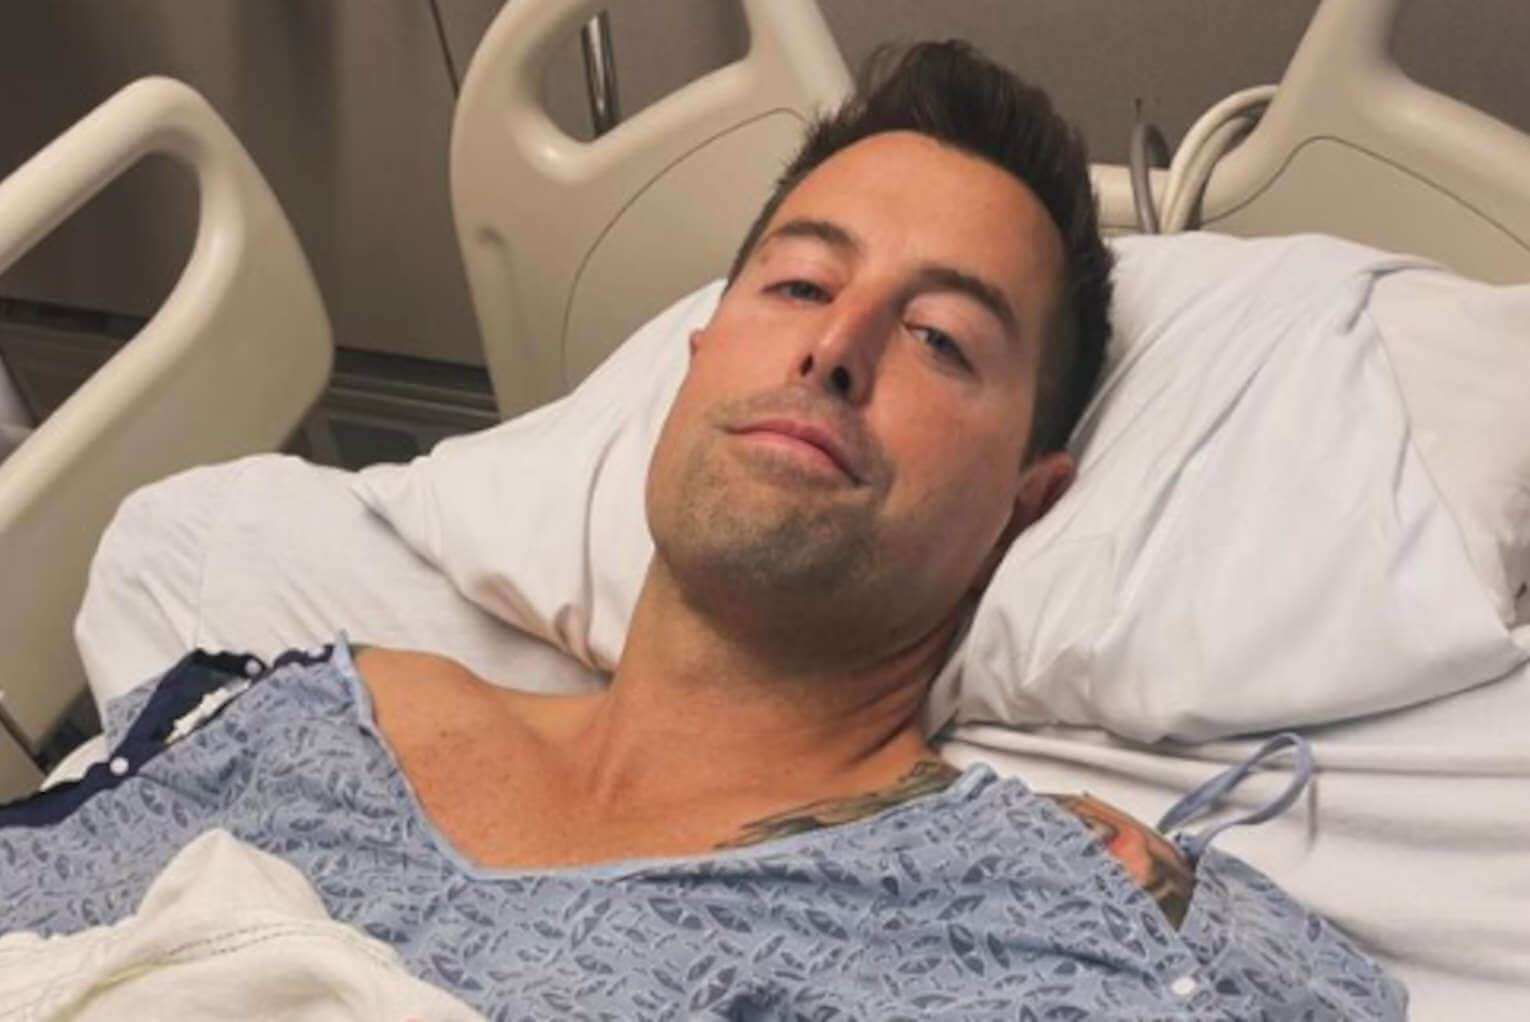 ‘Beyond Grateful’: Jeremy Camp’s Wife Provides Update After Singer’s Heart Surgery